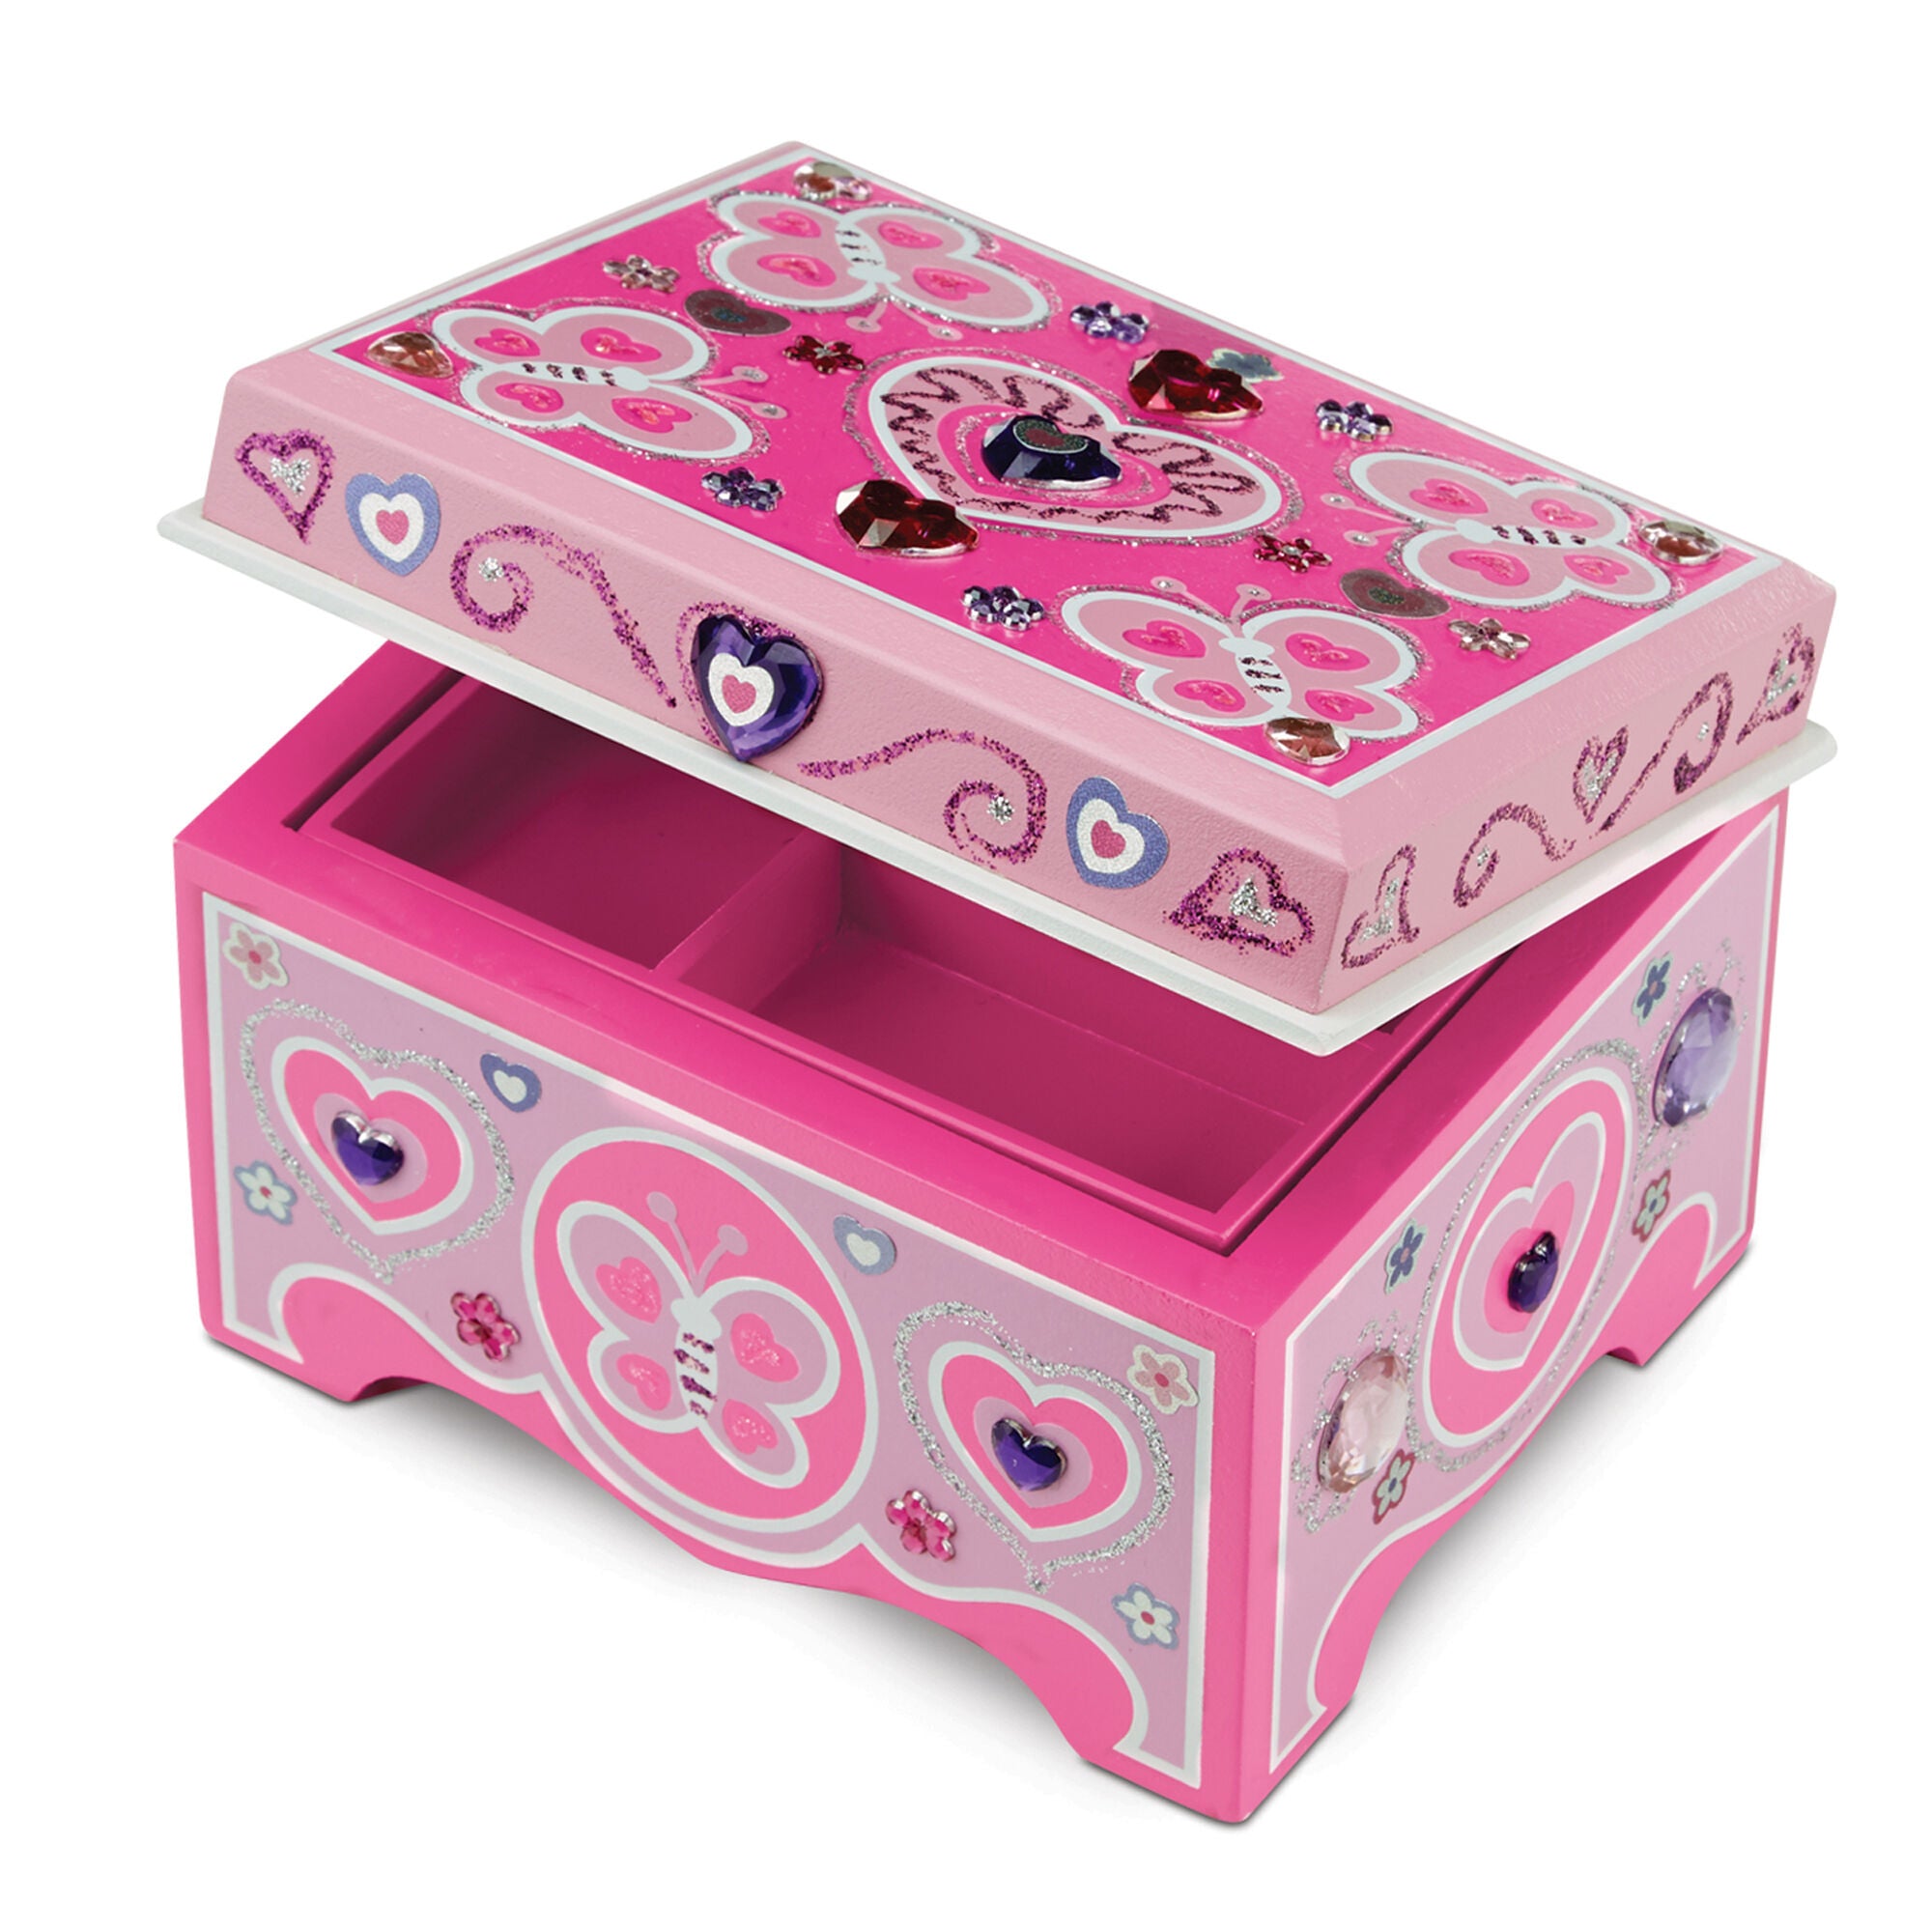 Created by Me! Jewelry Box Wooden Craft Kit by Melissa & Doug #8861